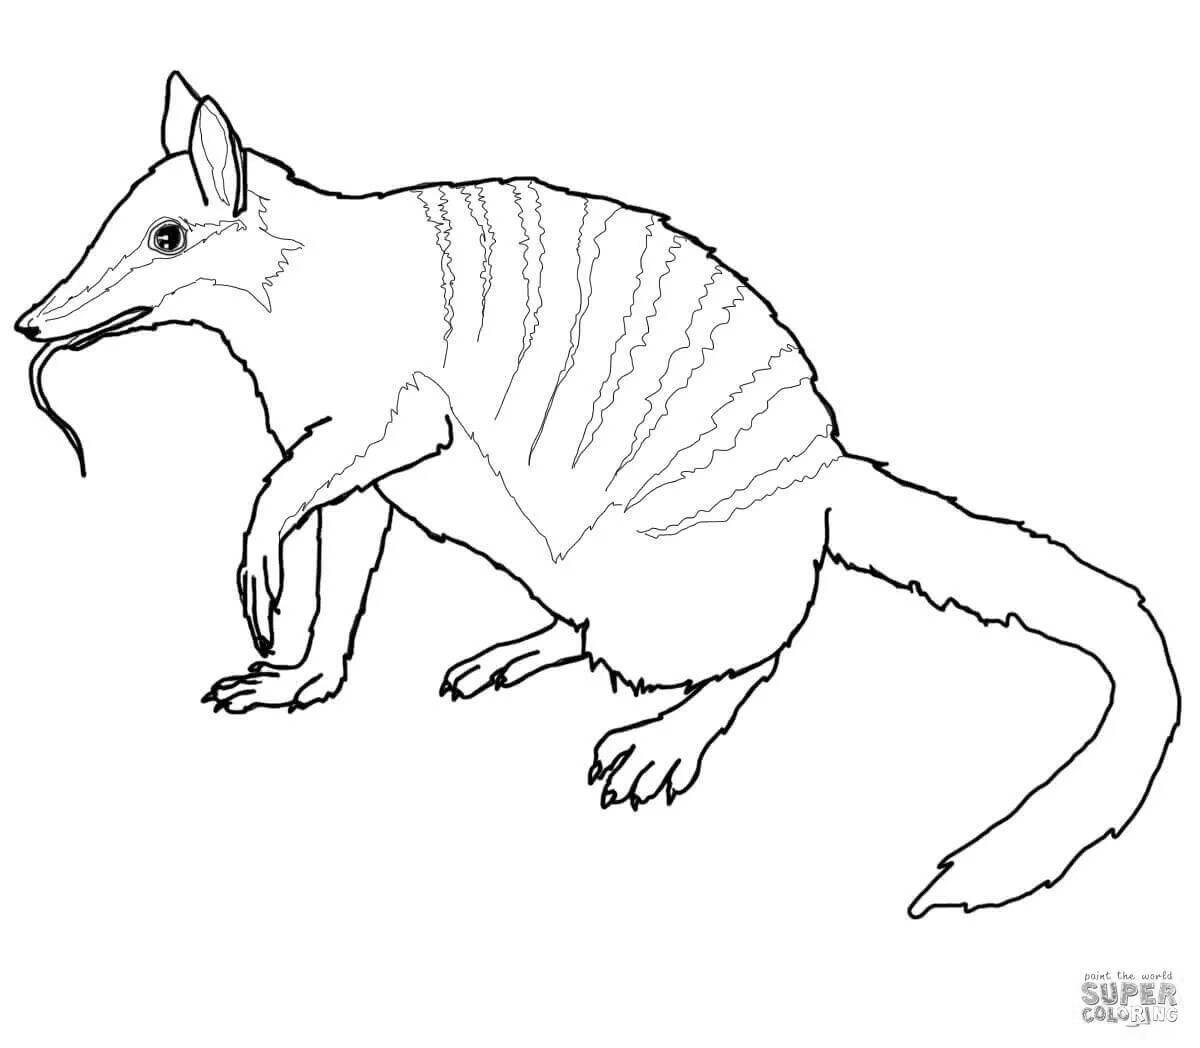 Australian animals playful coloring for kids